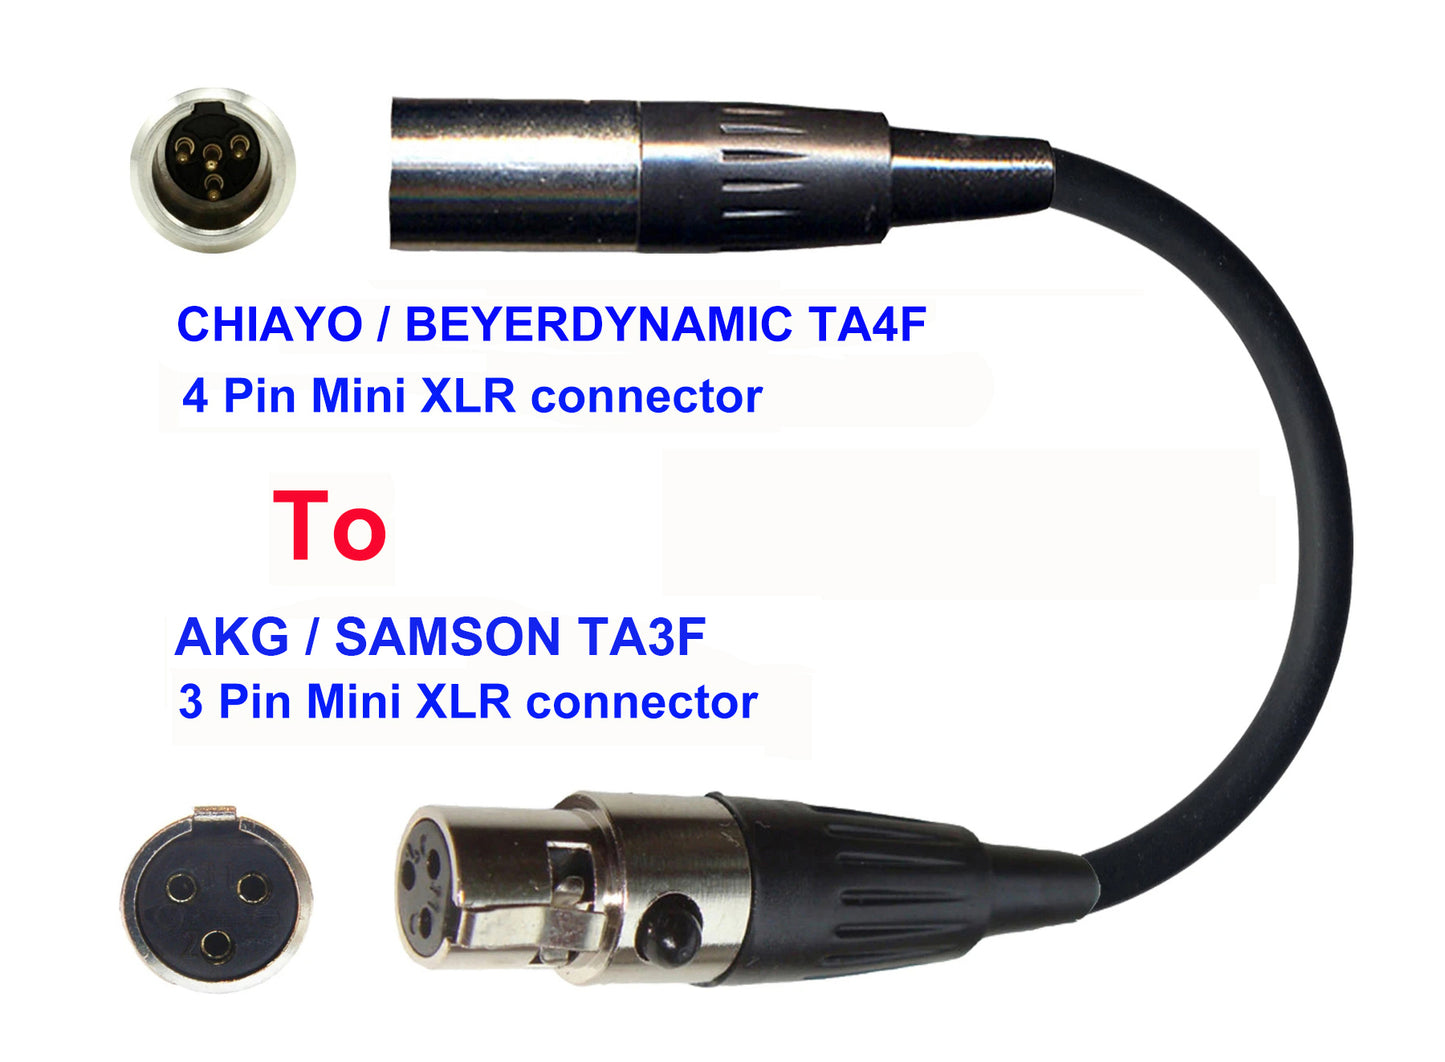 Microphone Adapter - Chiayo / JTS / Line6 / Beyerdynamic Microphones with TA4F 4 pin mini XLR connector TO AKG / Samson Transmitters with 3 pin TA3M connector